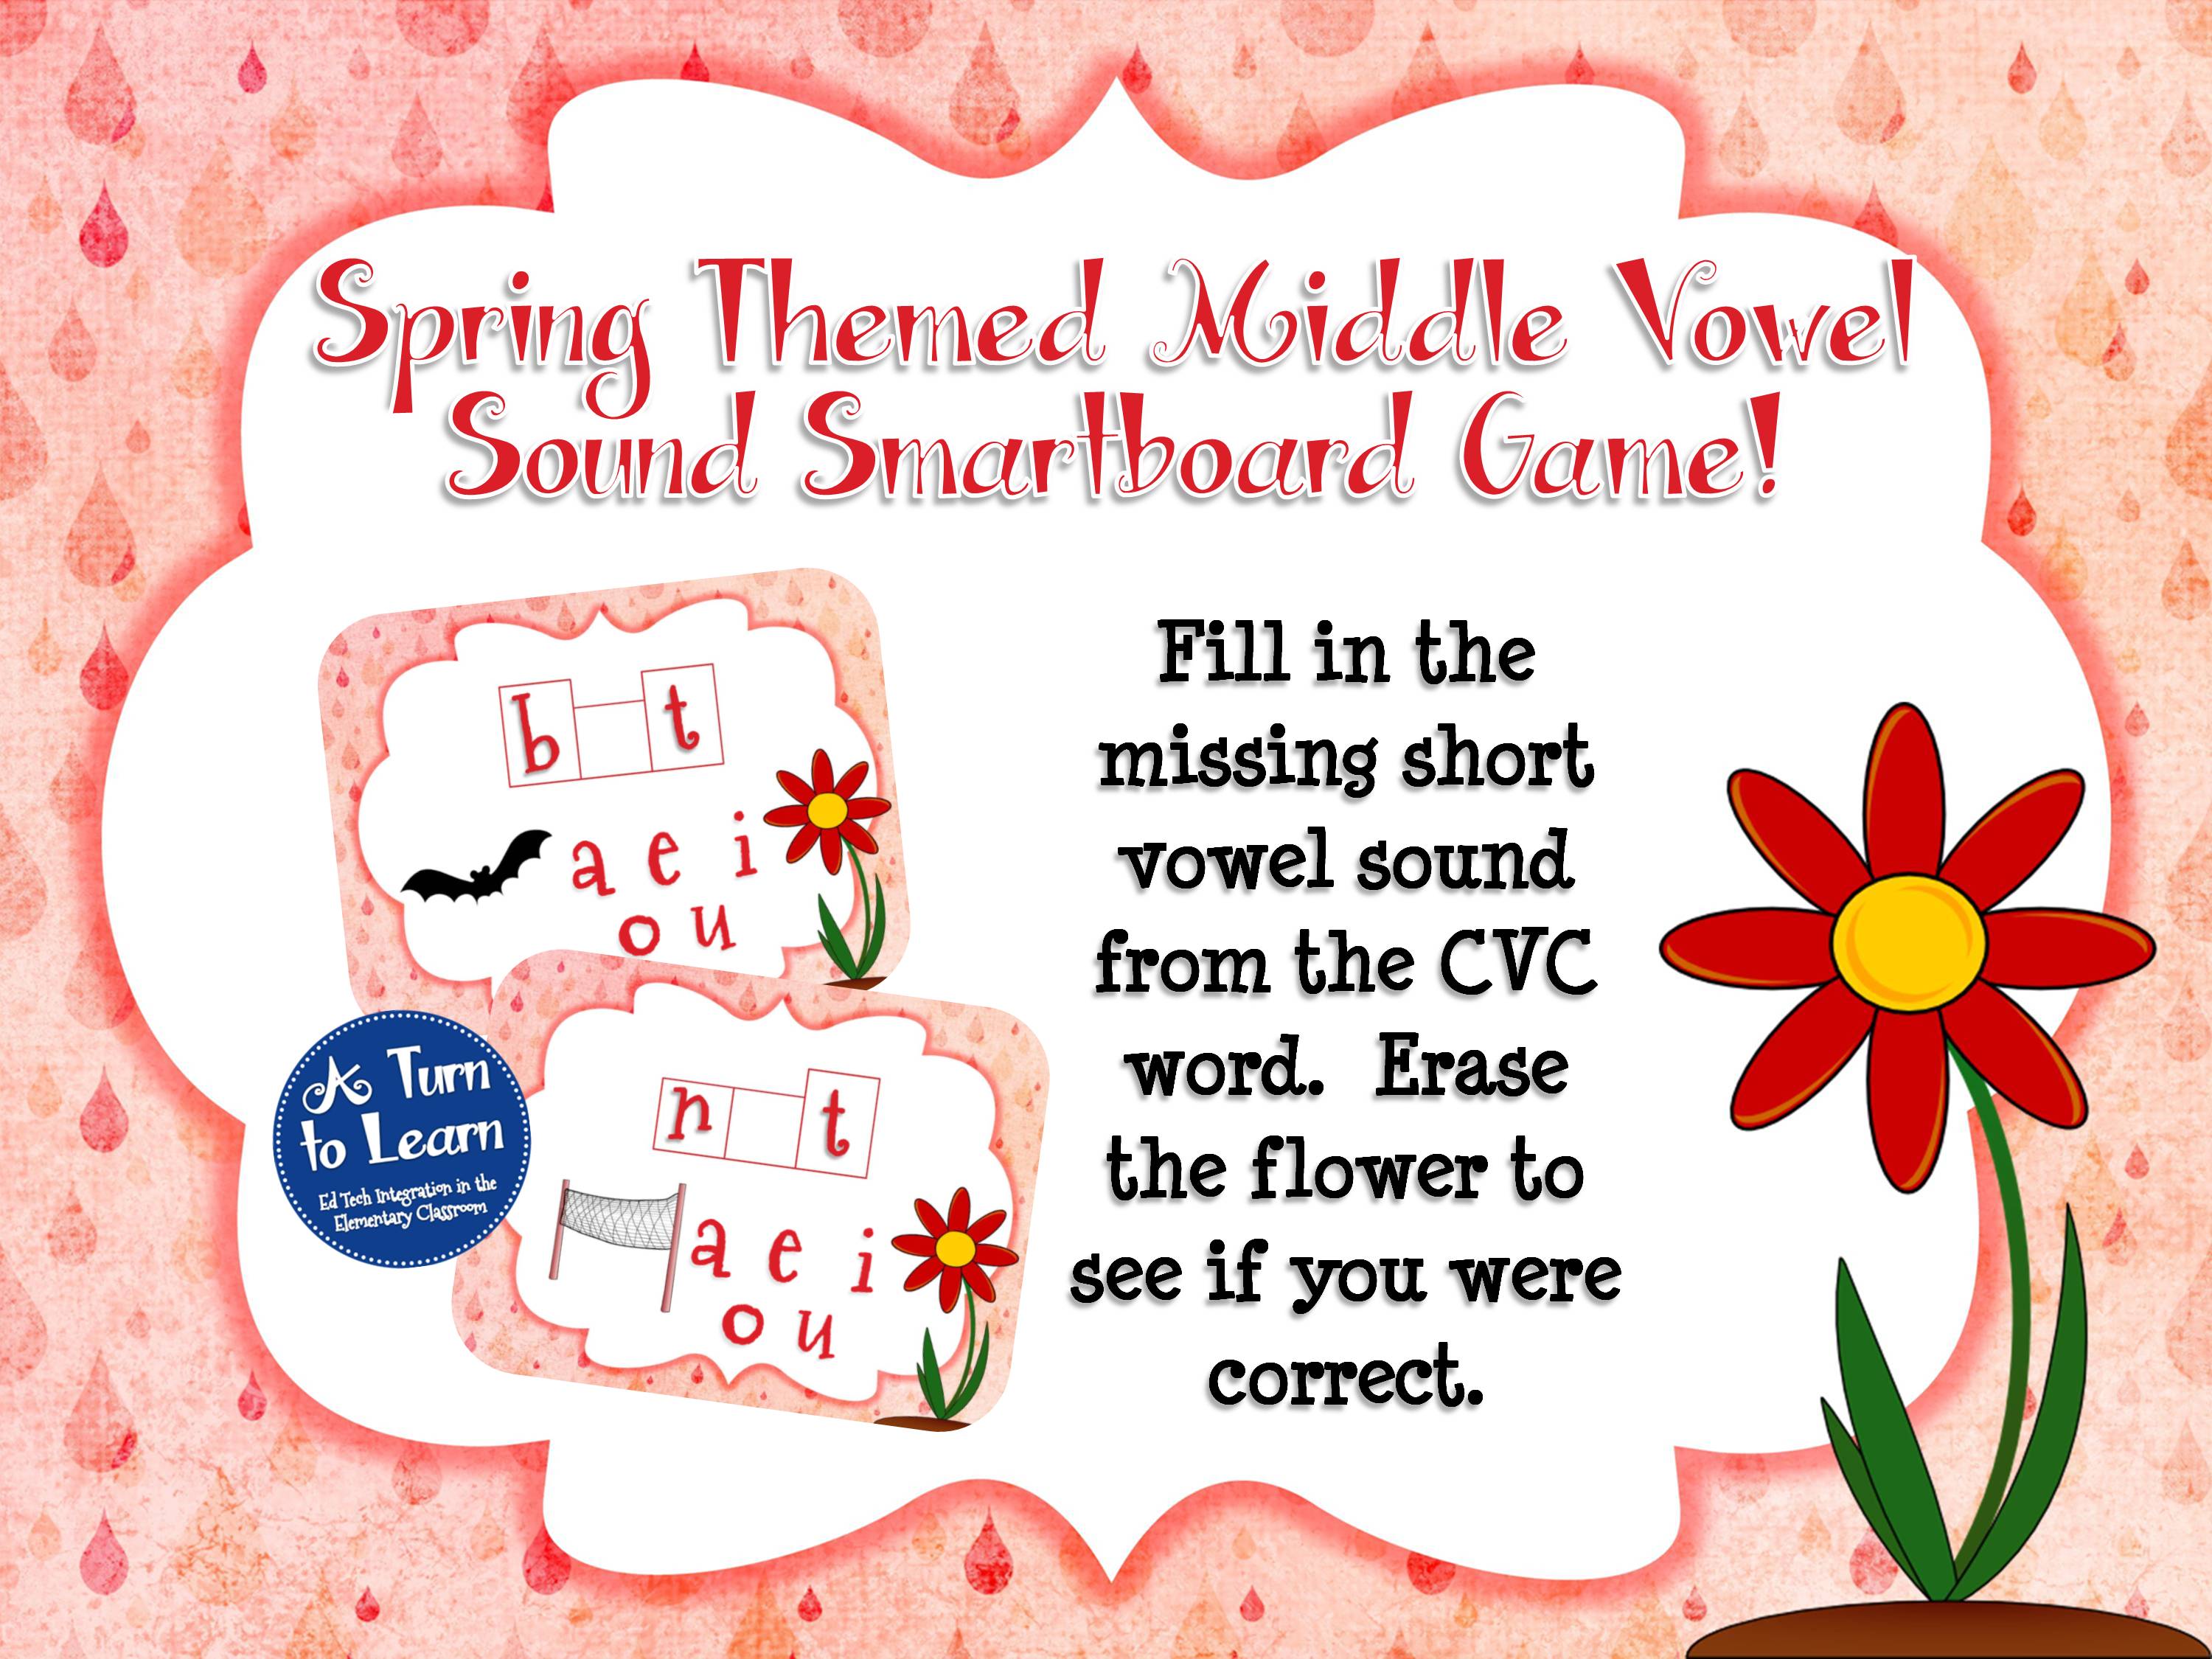 Spring Themed Middle Vowel Sounds Smartboard Game... Fill in the vowel sound in the CVC word!